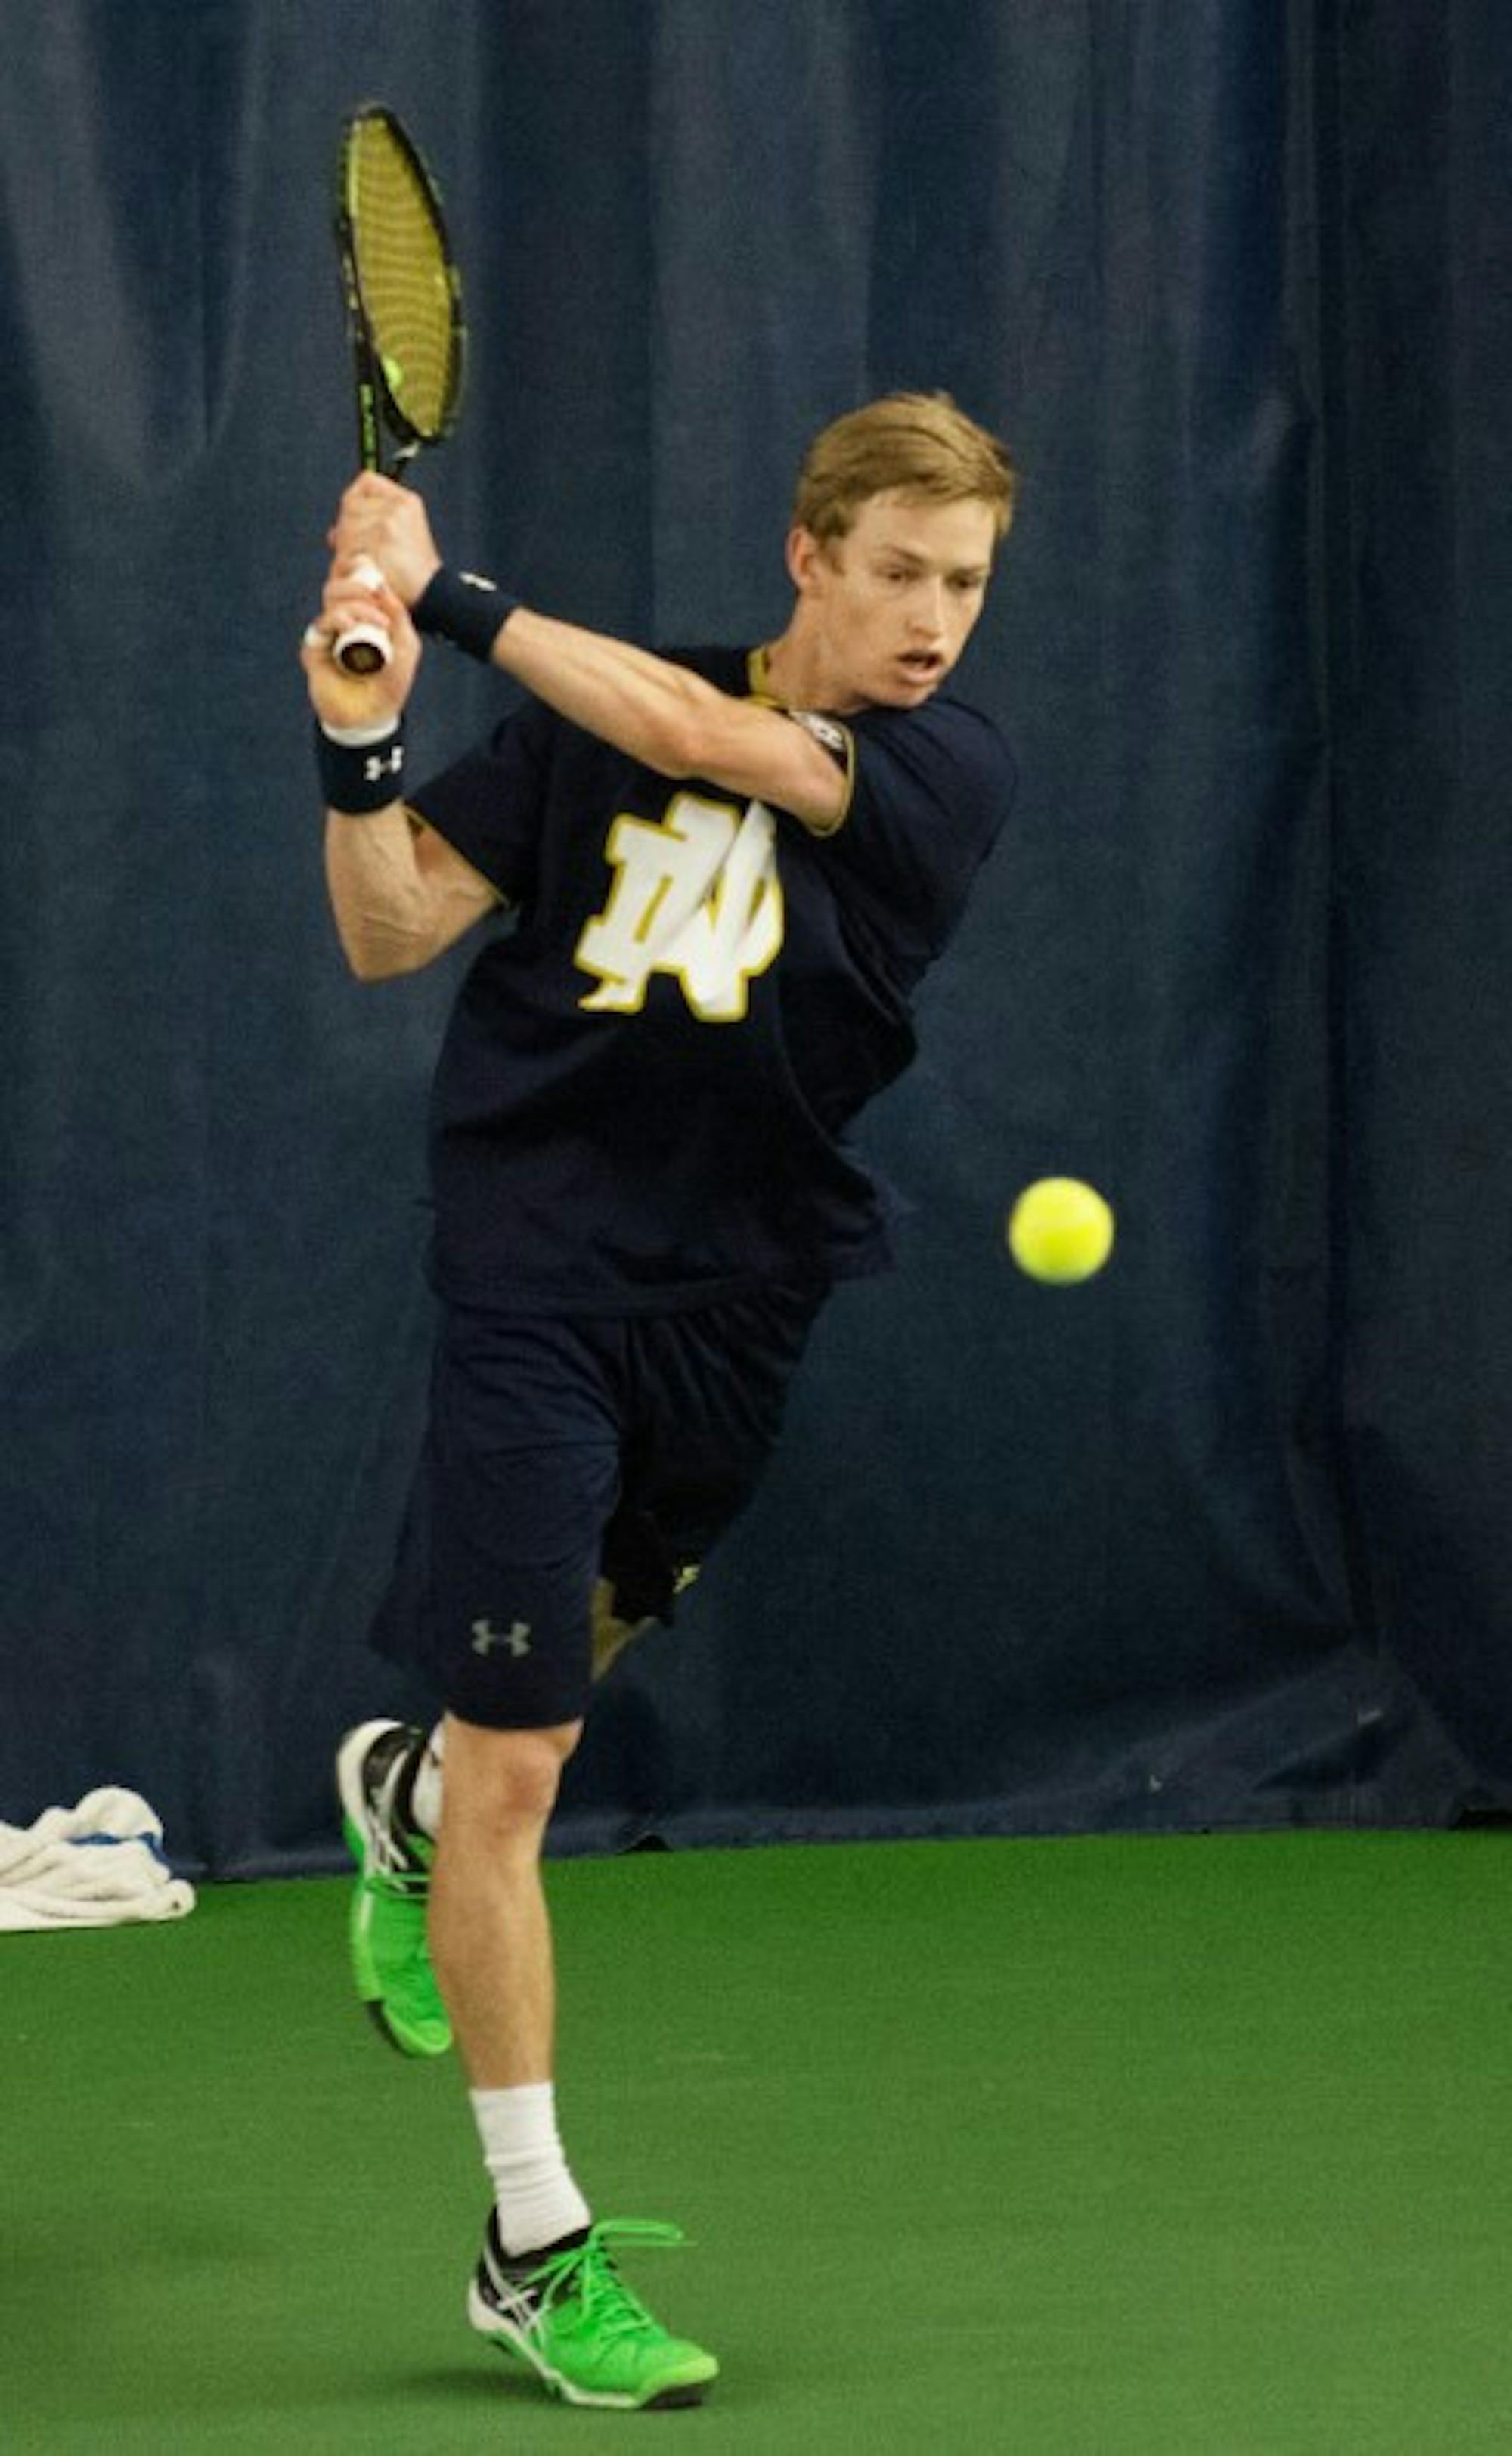 Irish senior Josh Hagar returns a shot during Notre Dame’s 5-2 victory over Duke on March 18 at Eck Tennis Pavilion. In the match, Hagar lost his singles match to sophomore Catalin Mateas 7-6 (6), 6-3.